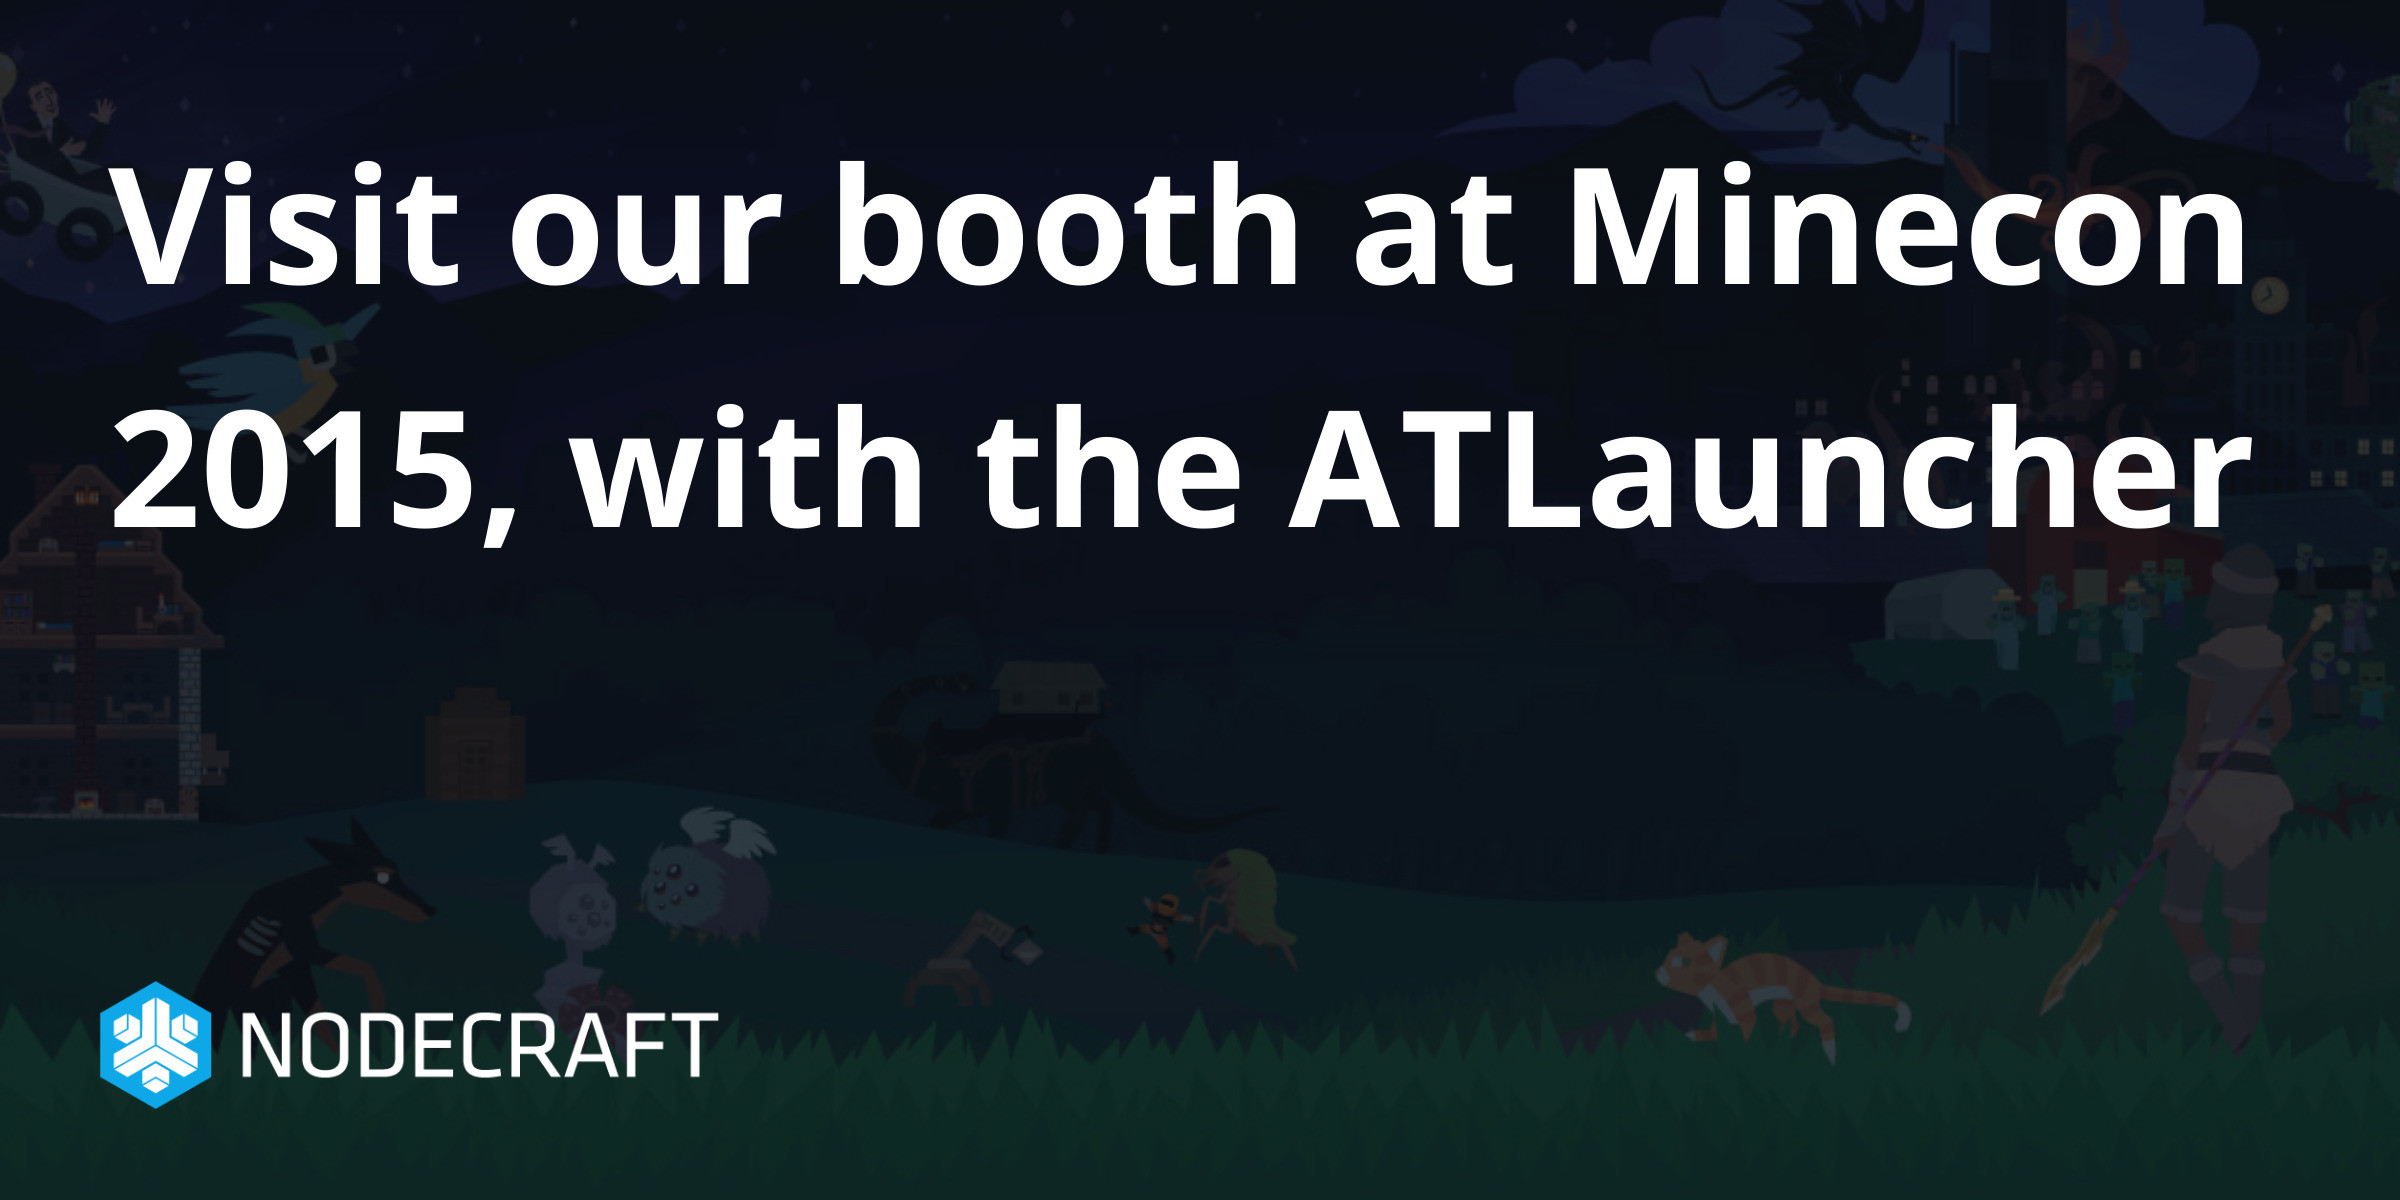 Visit our booth at Minecon 2015, with the ATLauncher